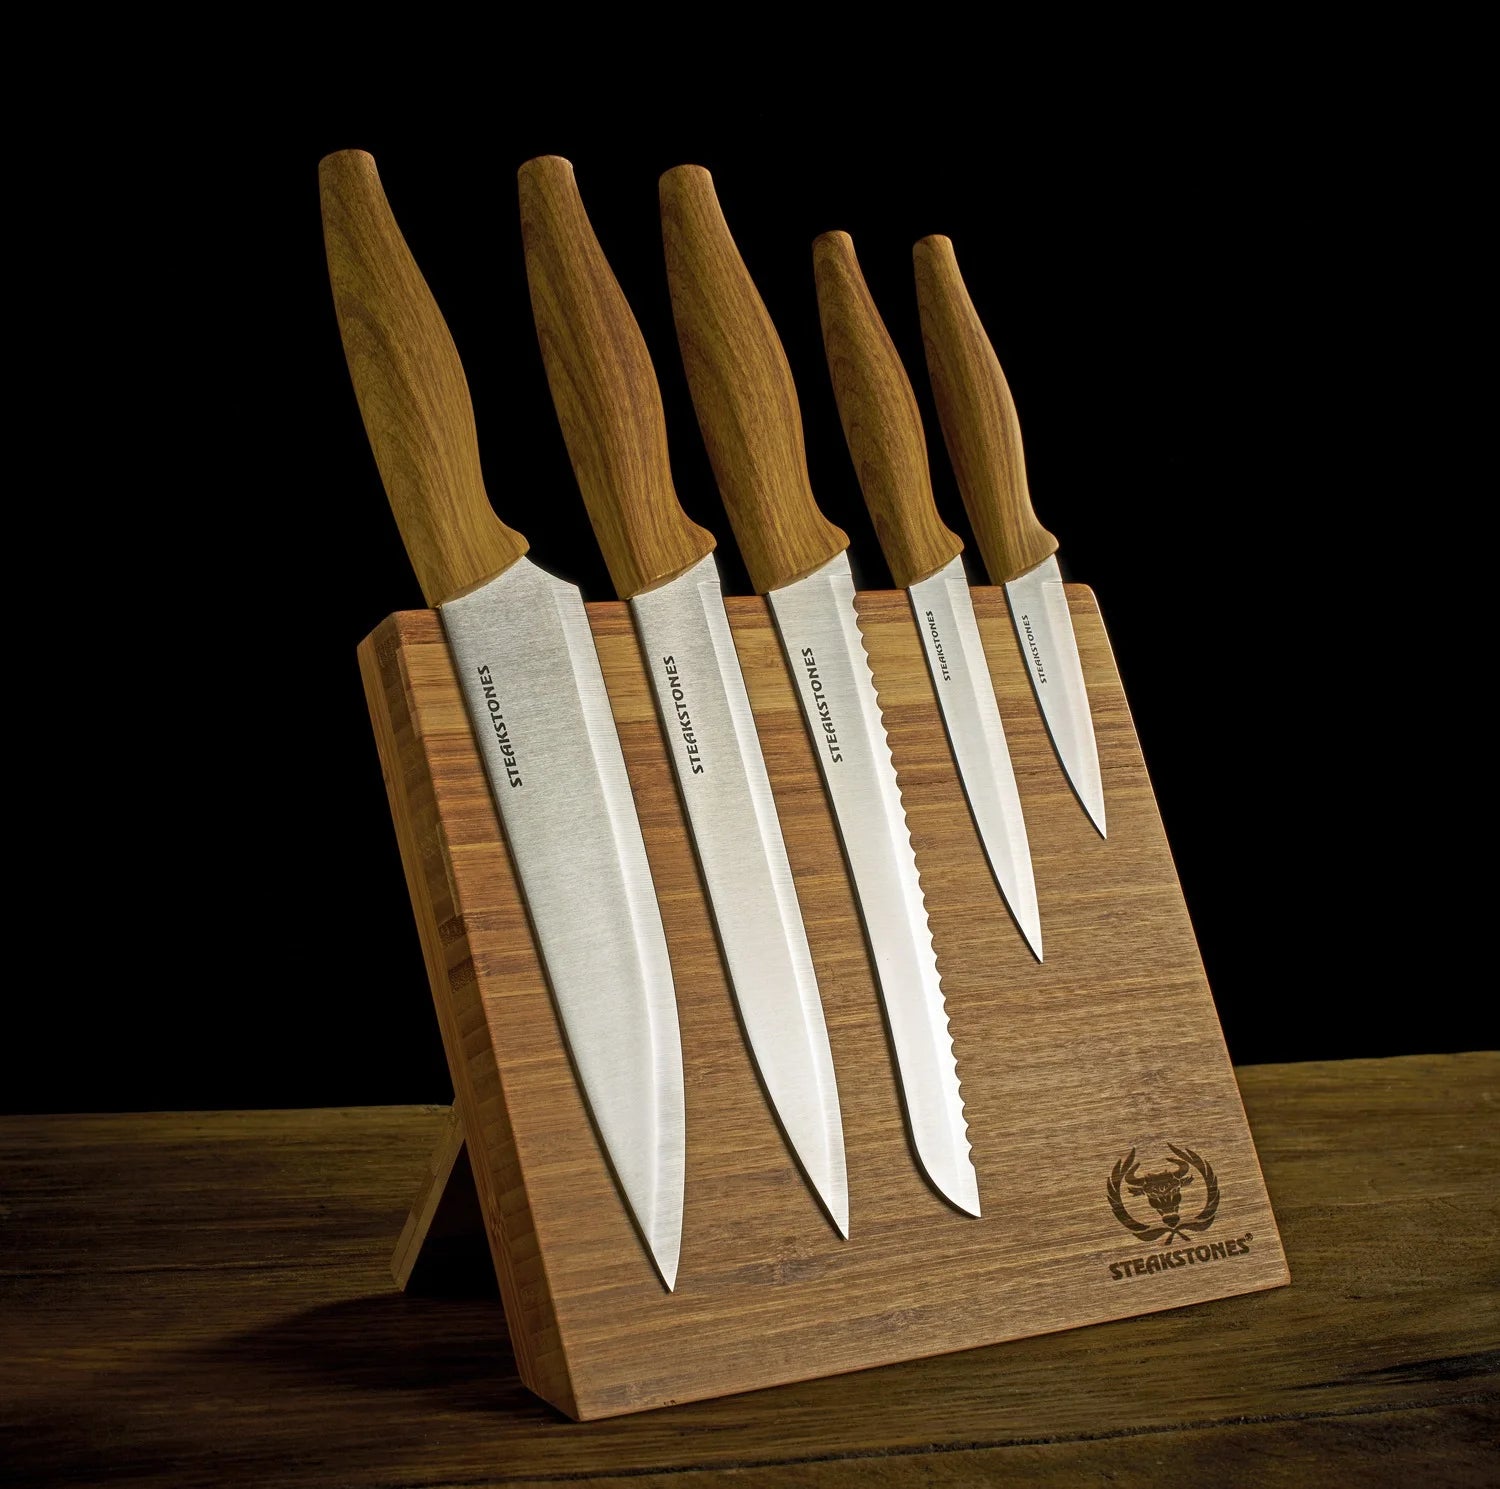 Set of 5 Stainless Steel Kitchen Knives